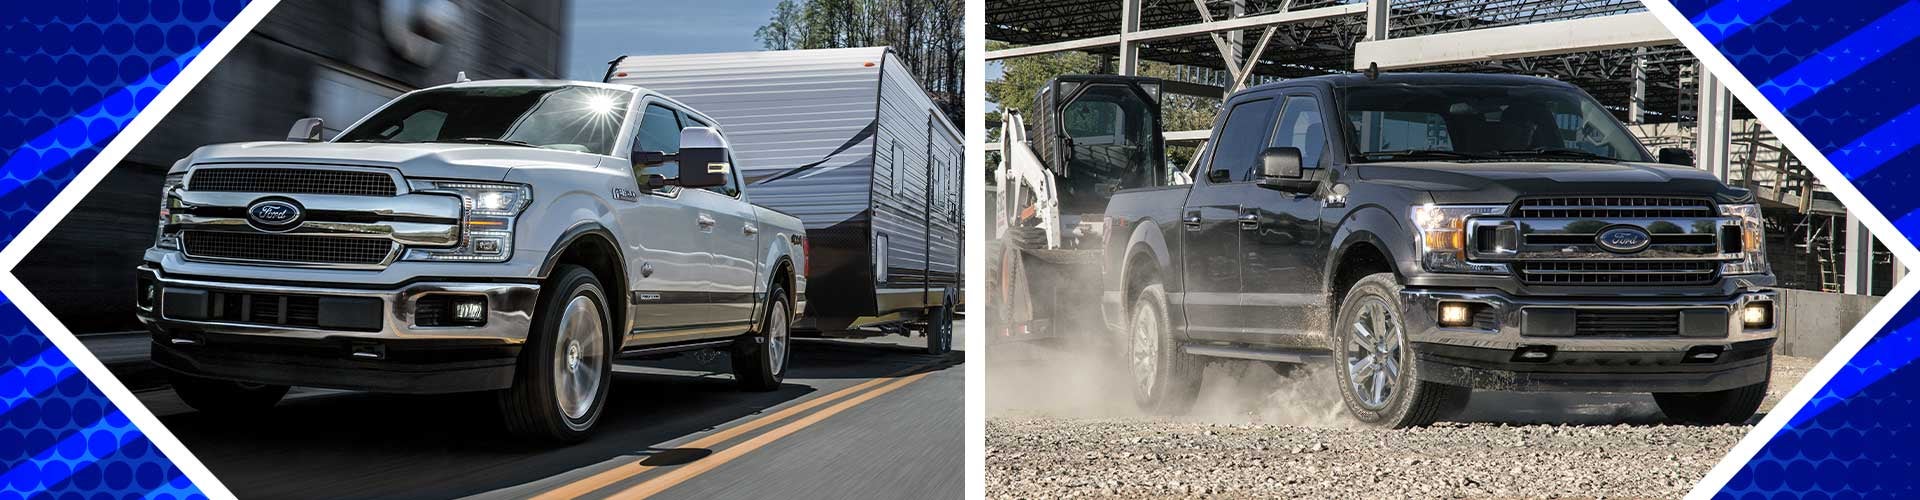 2020 Ford F-150 | Towing Capacity & More | Boulevard Ford of Lewes 2020 Ford F 150 3.0 Diesel Towing Capacity